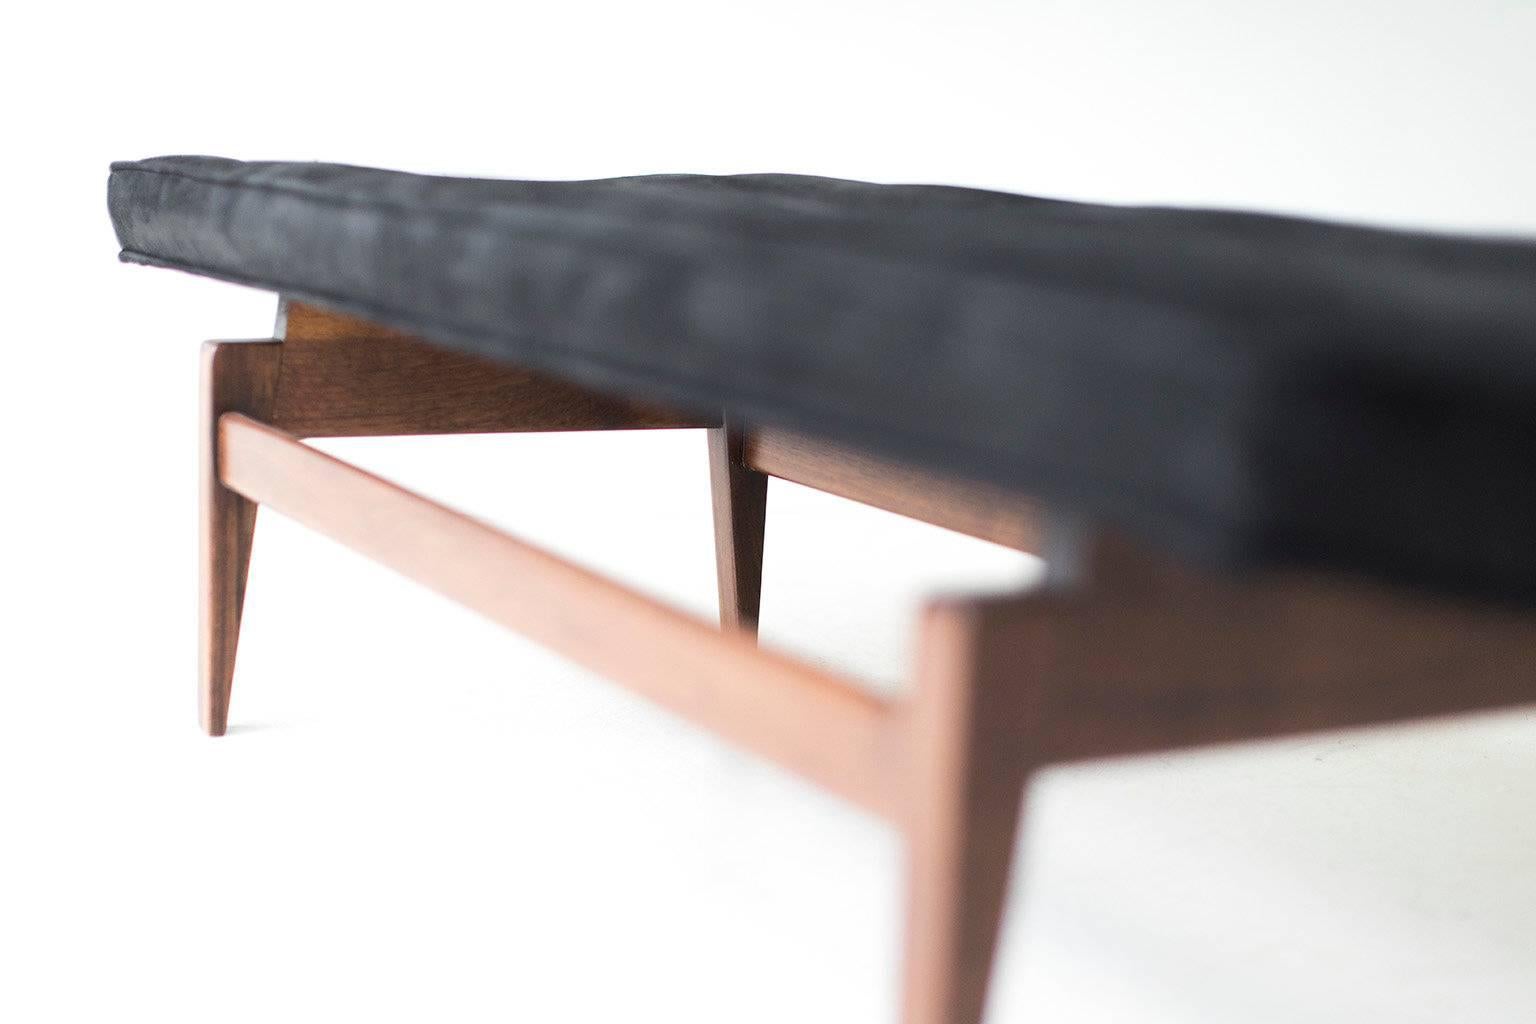 Designer: Jens Risom. 

Manufacturer: Jens Risom Design Inc. 
Period or model: Mid-Century Modern.
Specifications: Walnut, leather. 

Condition: 

This Jens Risom bench for Risom Deign Inc. is in excellent restored condition. The walnut